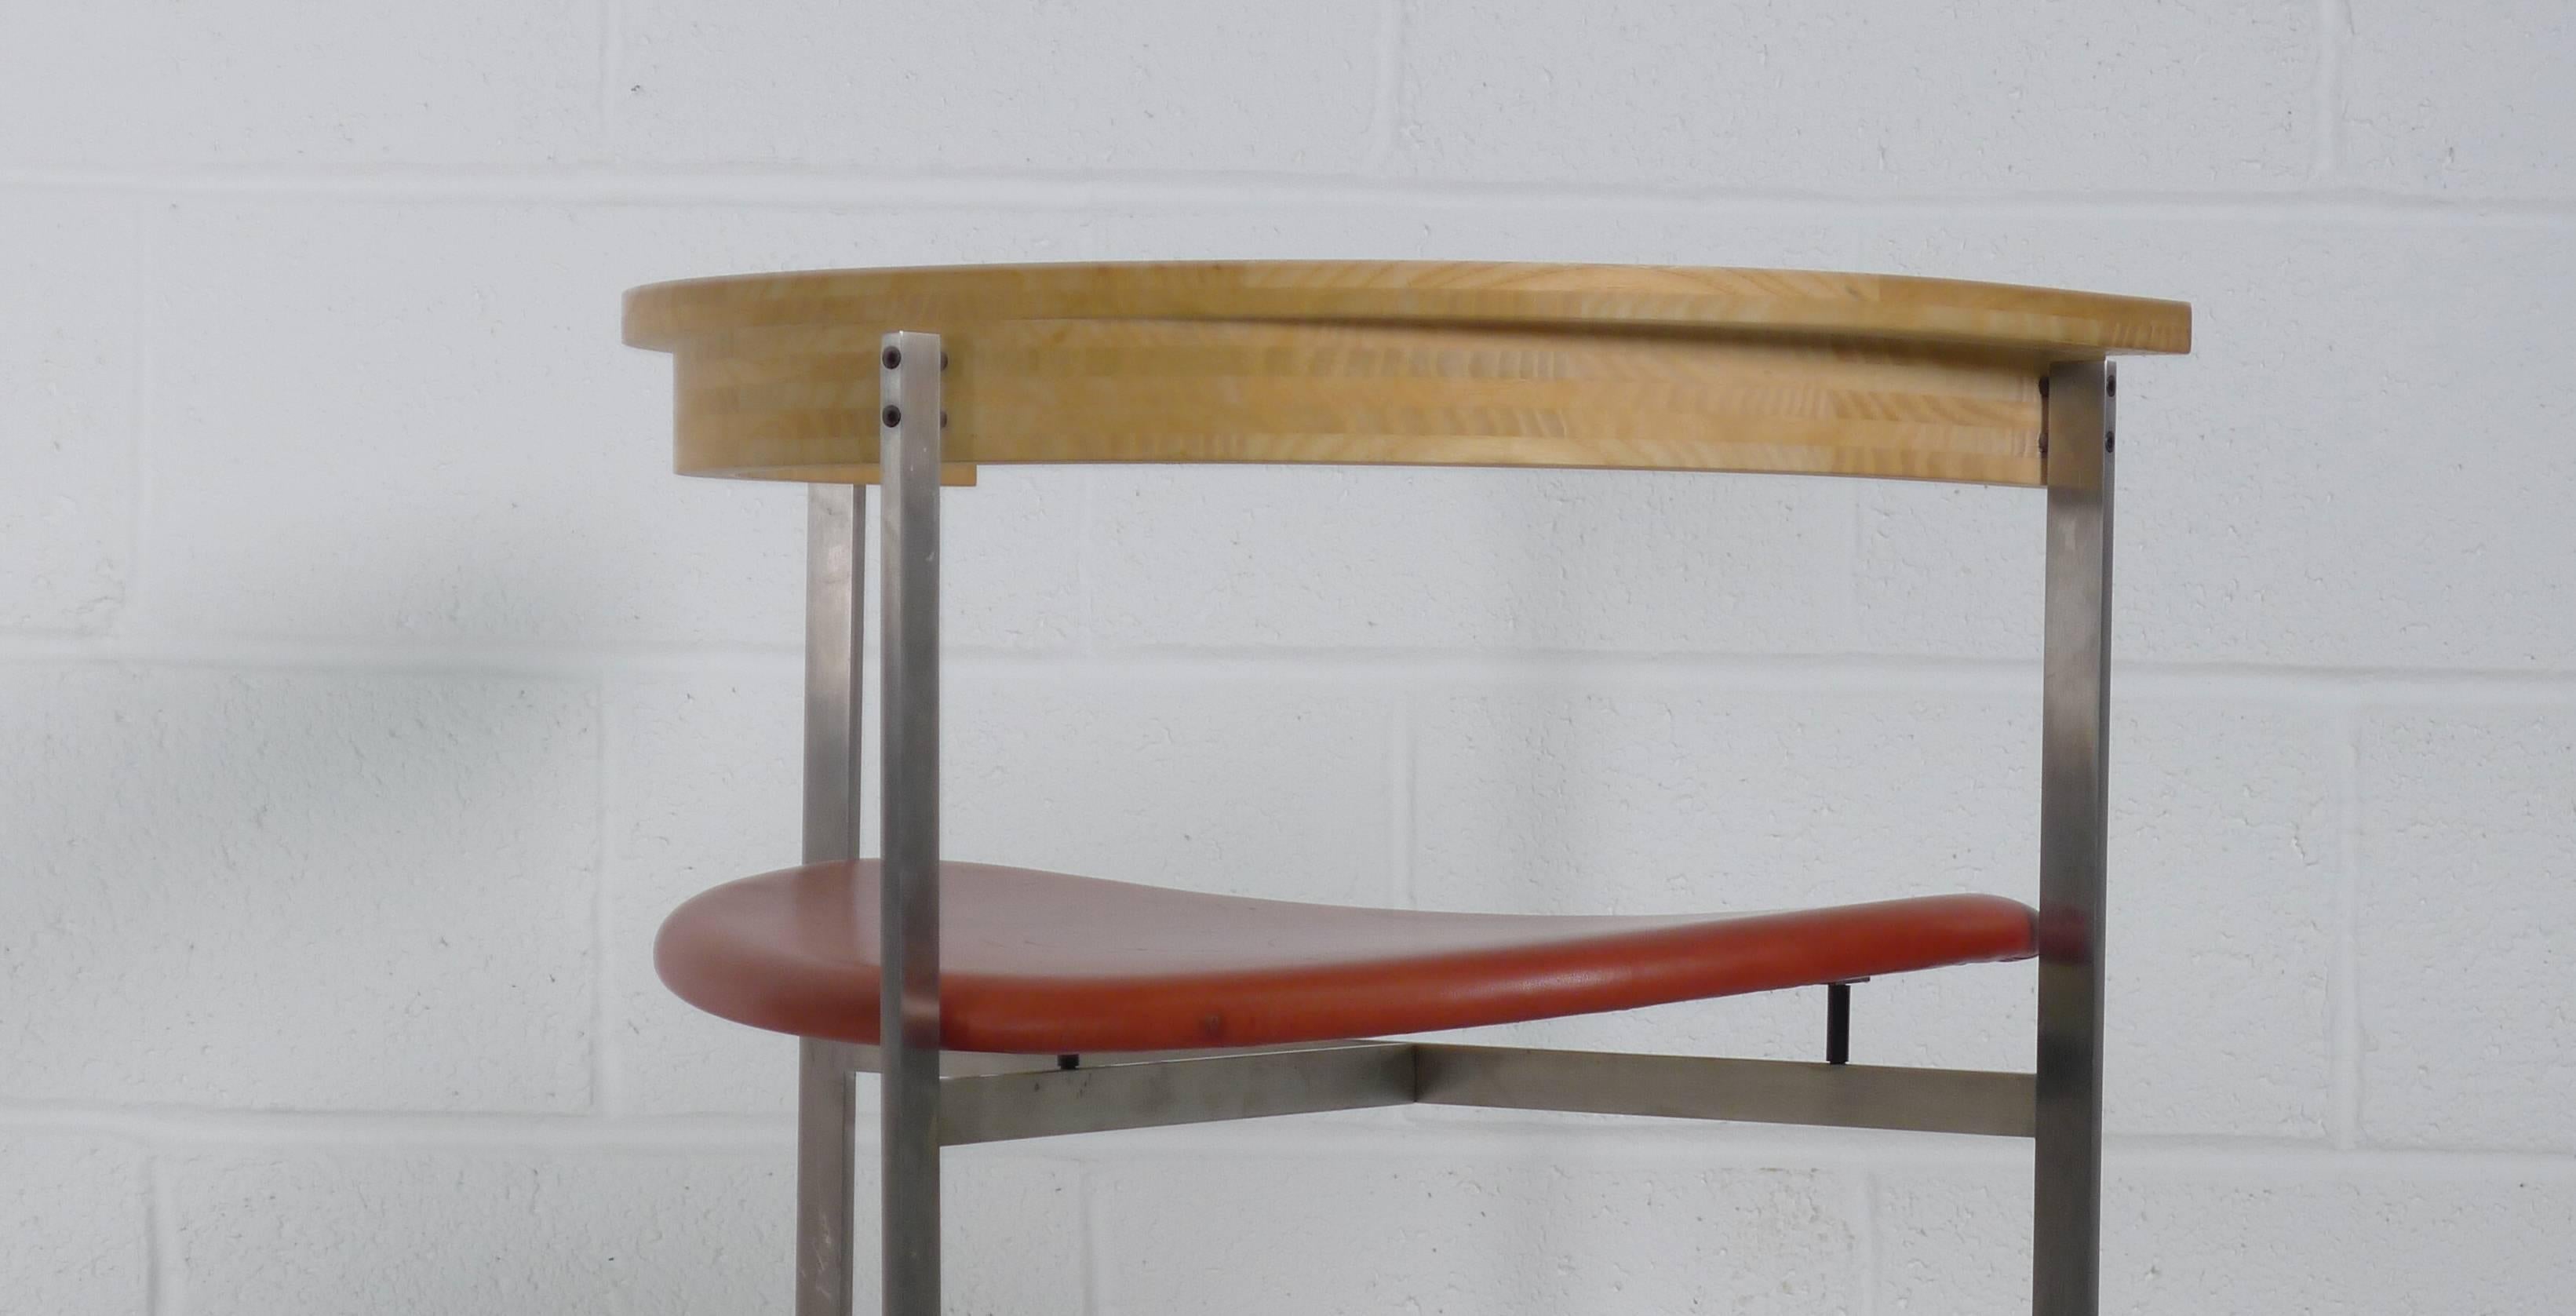 Poul Kjærholm designed, 1957 for E. Kold Christensen, Denmark. Brushed Steel framework supporting red/brown leather seat and sculptural curved wood backrest. This example manufactured by Kjaerholm Designs circa 1990 and no longer in production,